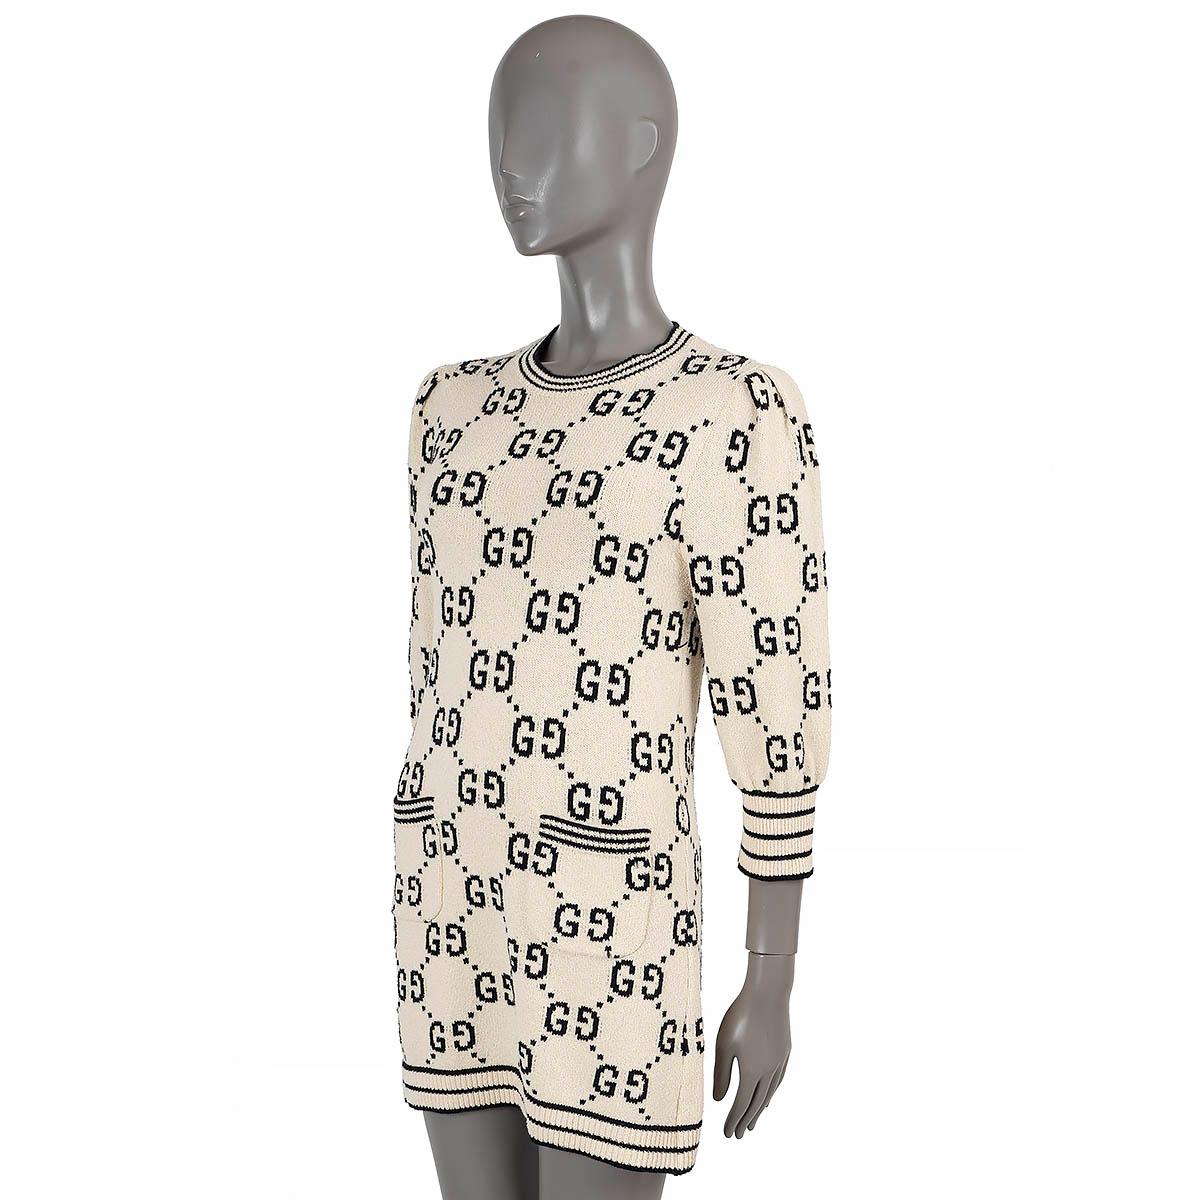 100% authentic Gucci GG Monogram knit dress in cream and black jacquard cotton (with 28% polyamide - please note the content tag is missing). Features a crewneck, two pockets at the waist and short puff-sleeves  with rib-knit cuffs. Has been worn